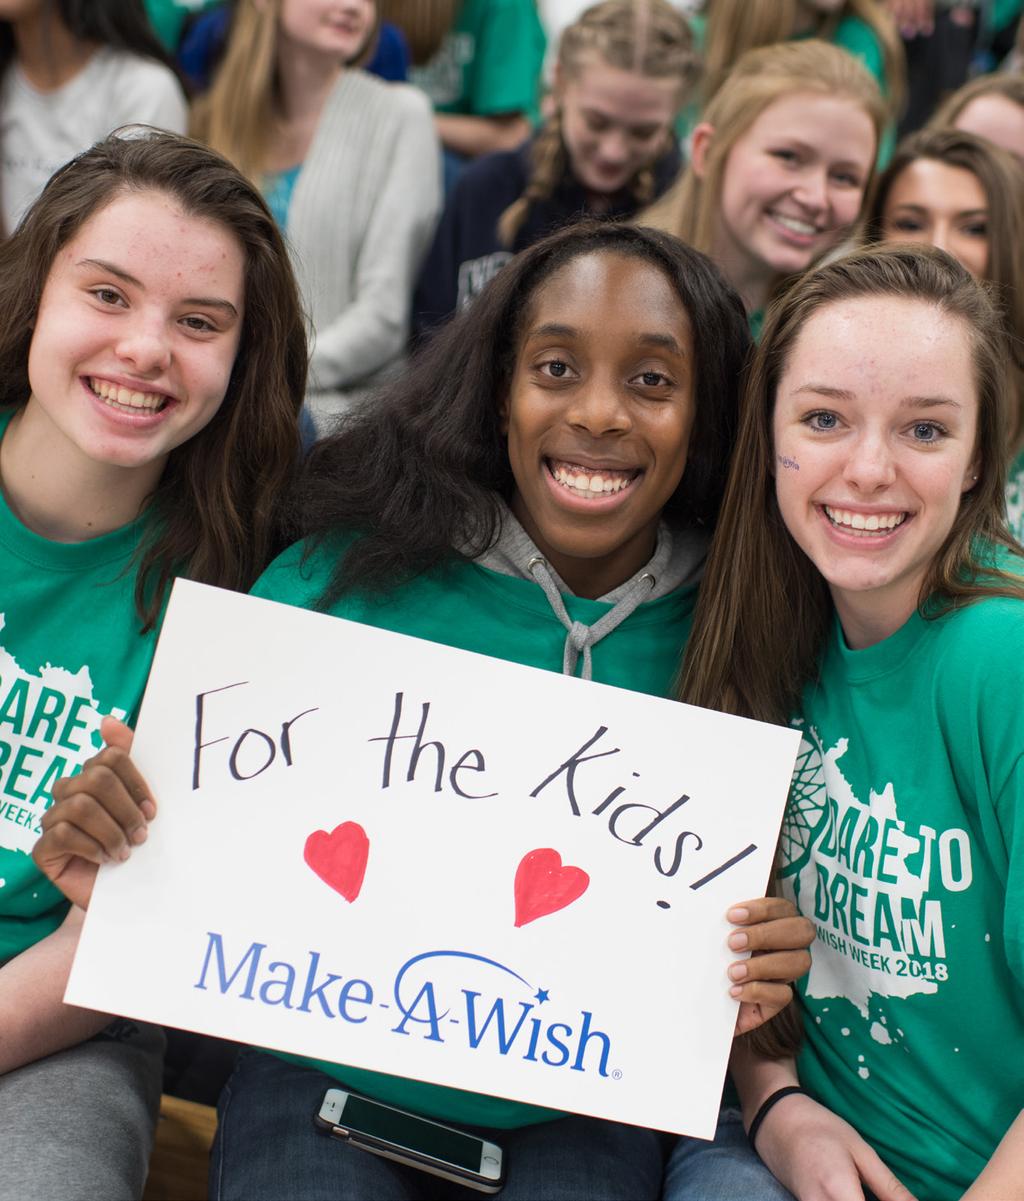 YOUR MAKE-A-WISH SUPPORT TEAM Make-A-Wish is excited to partner with you through the Kids For Wish Kids program!